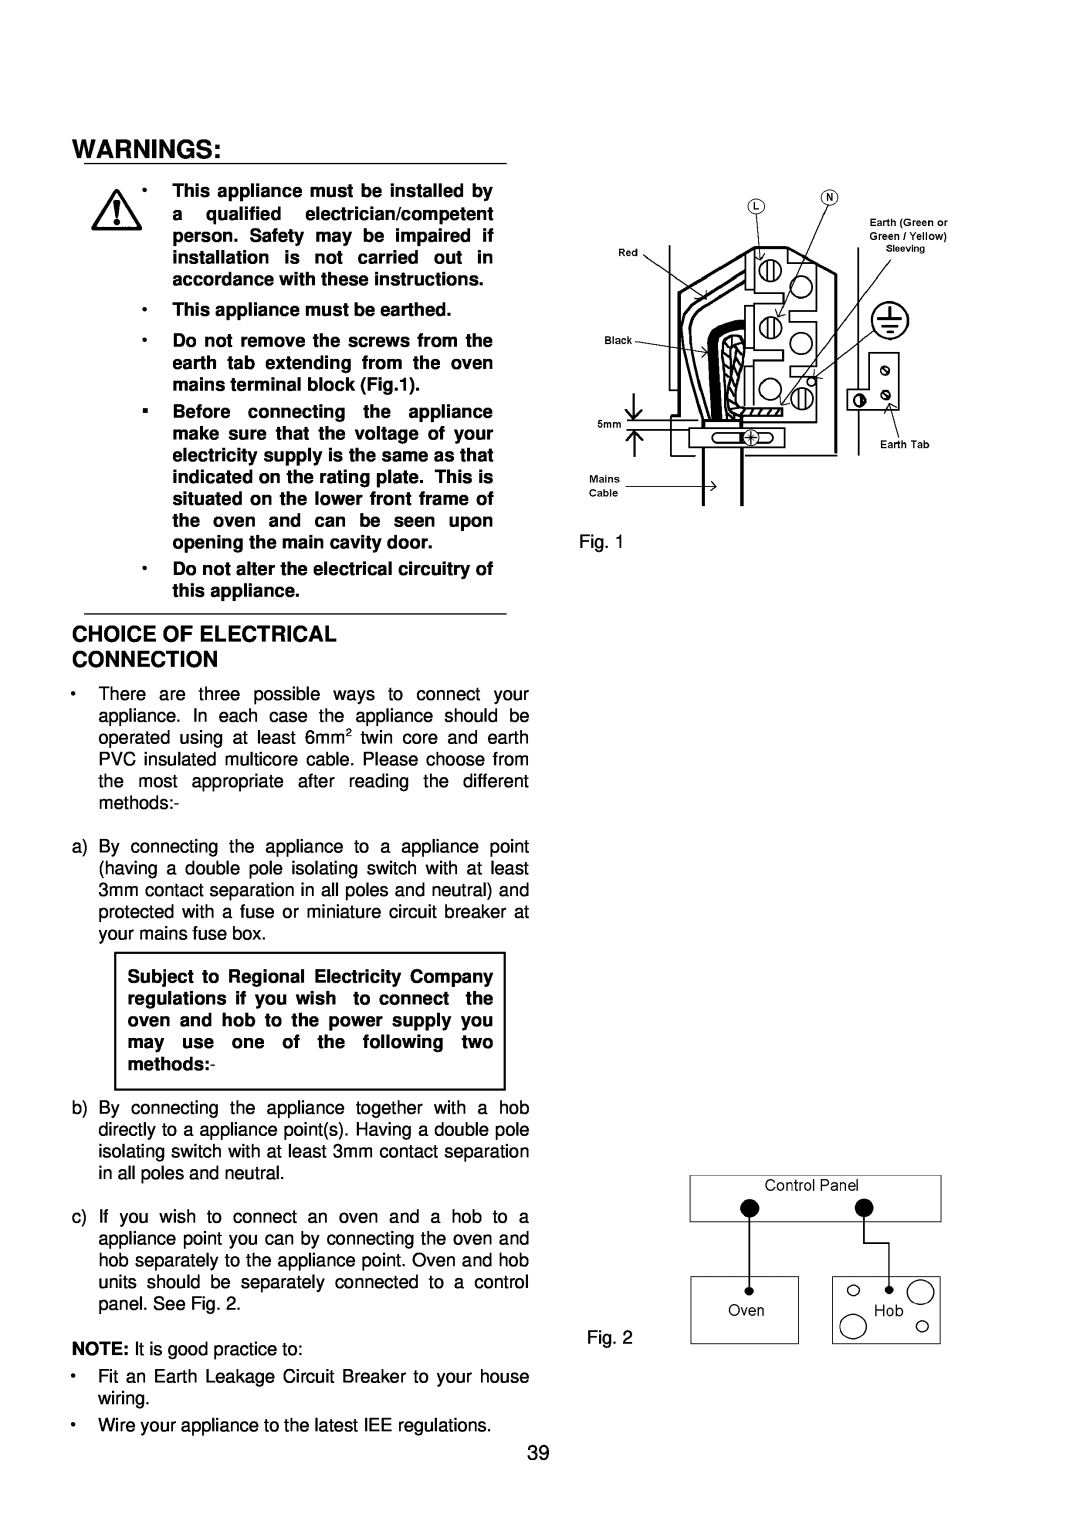 AEG D4100-1 manual Warnings, Choice Of Electrical Connection 